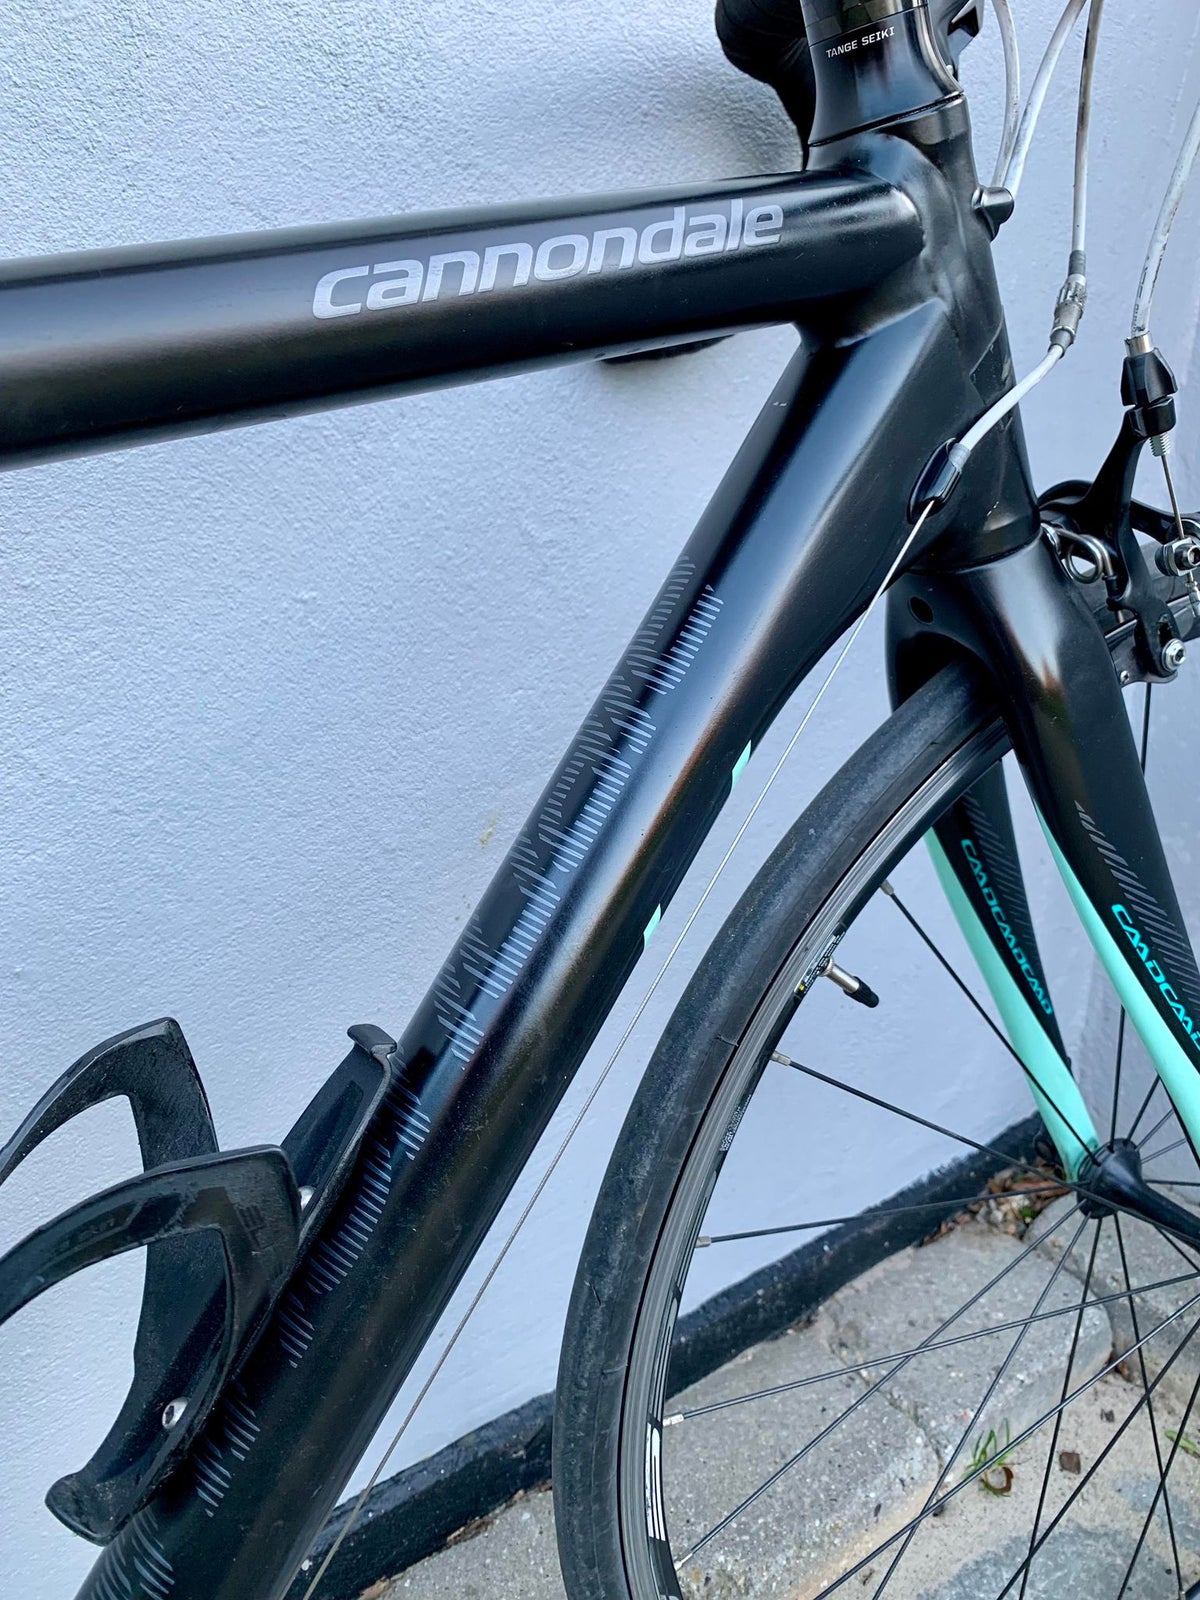 Herreracer, Cannondale Caad 10, 50 cm stel